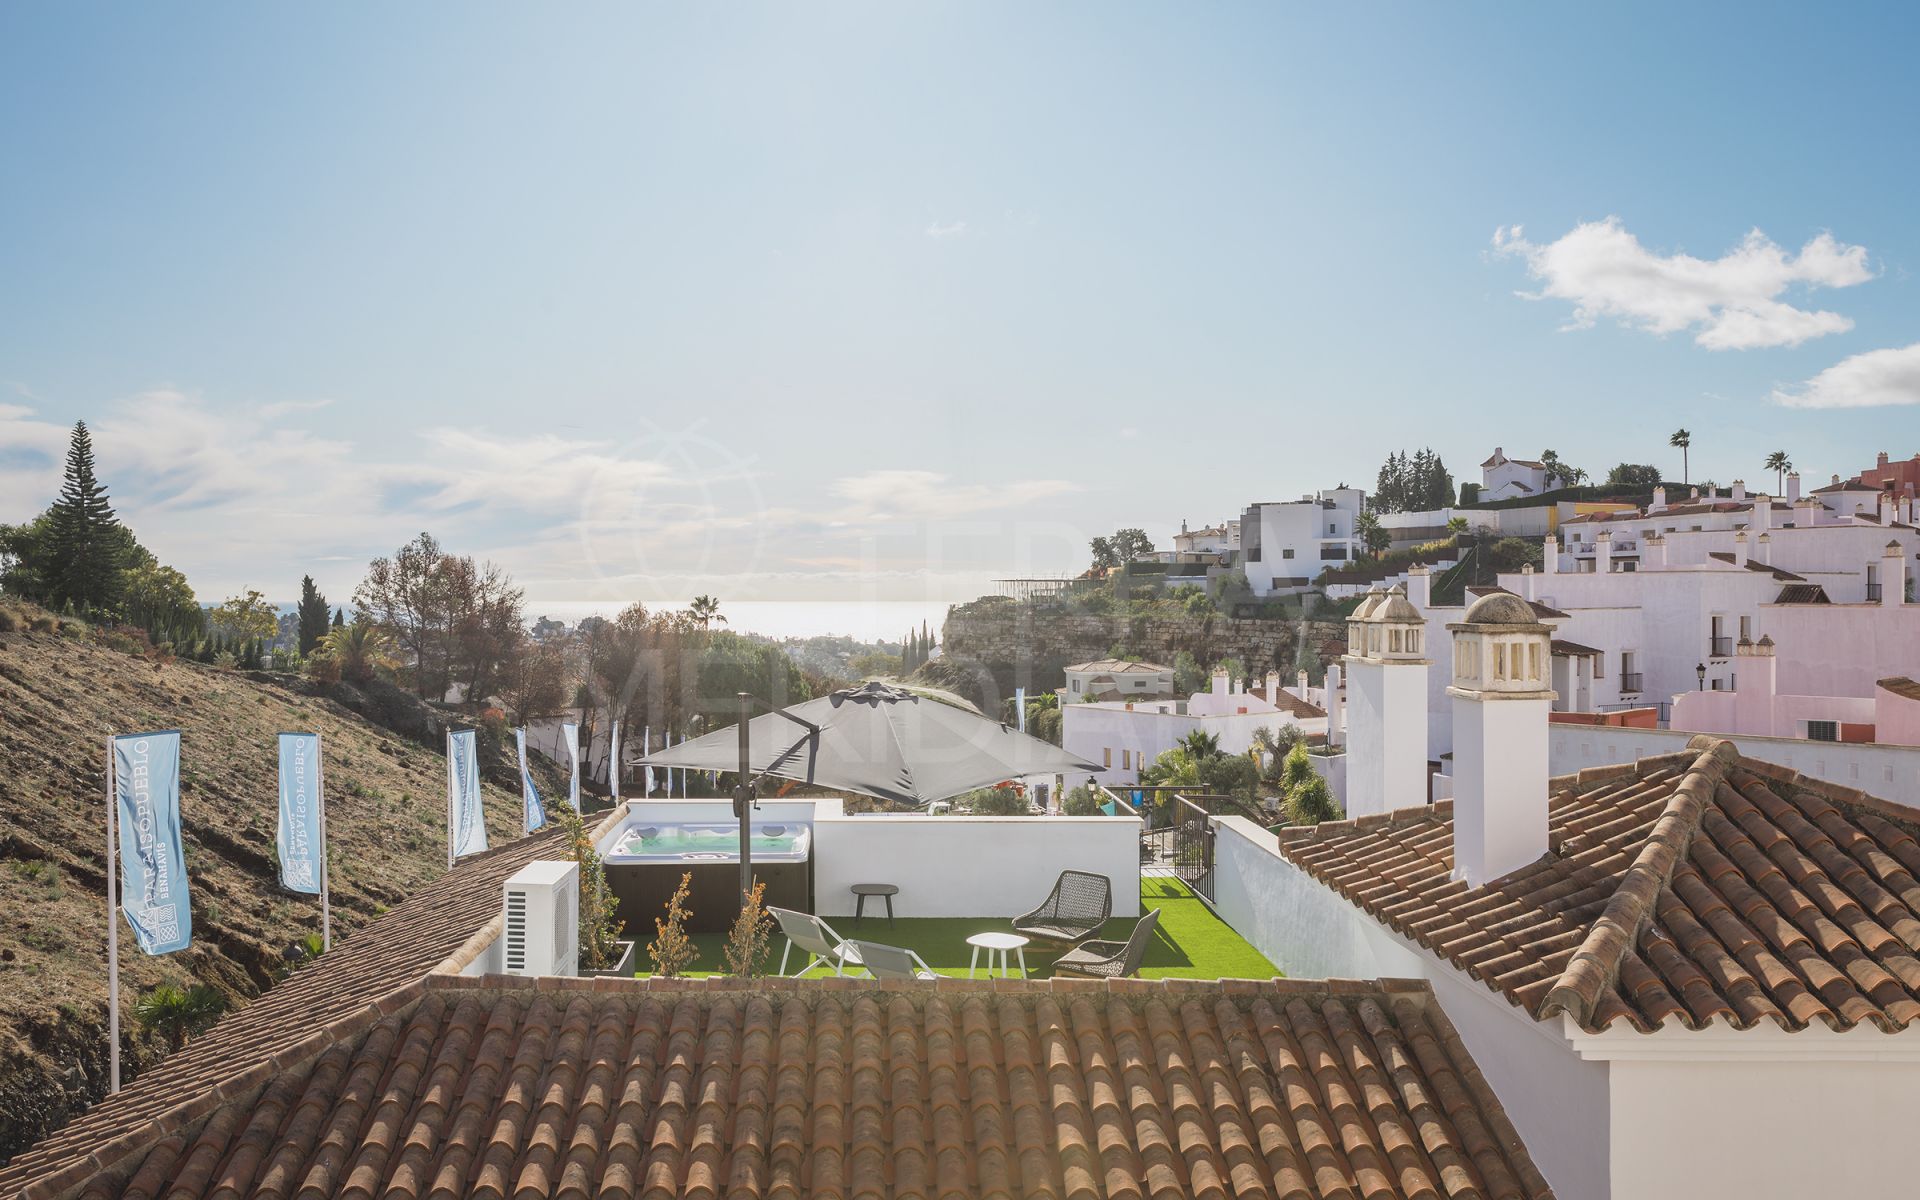 Paraiso Pueblo, Benahavis - 2 and 3 Bedroom contemporary apartments in a luscious community with ample gardens and facilities